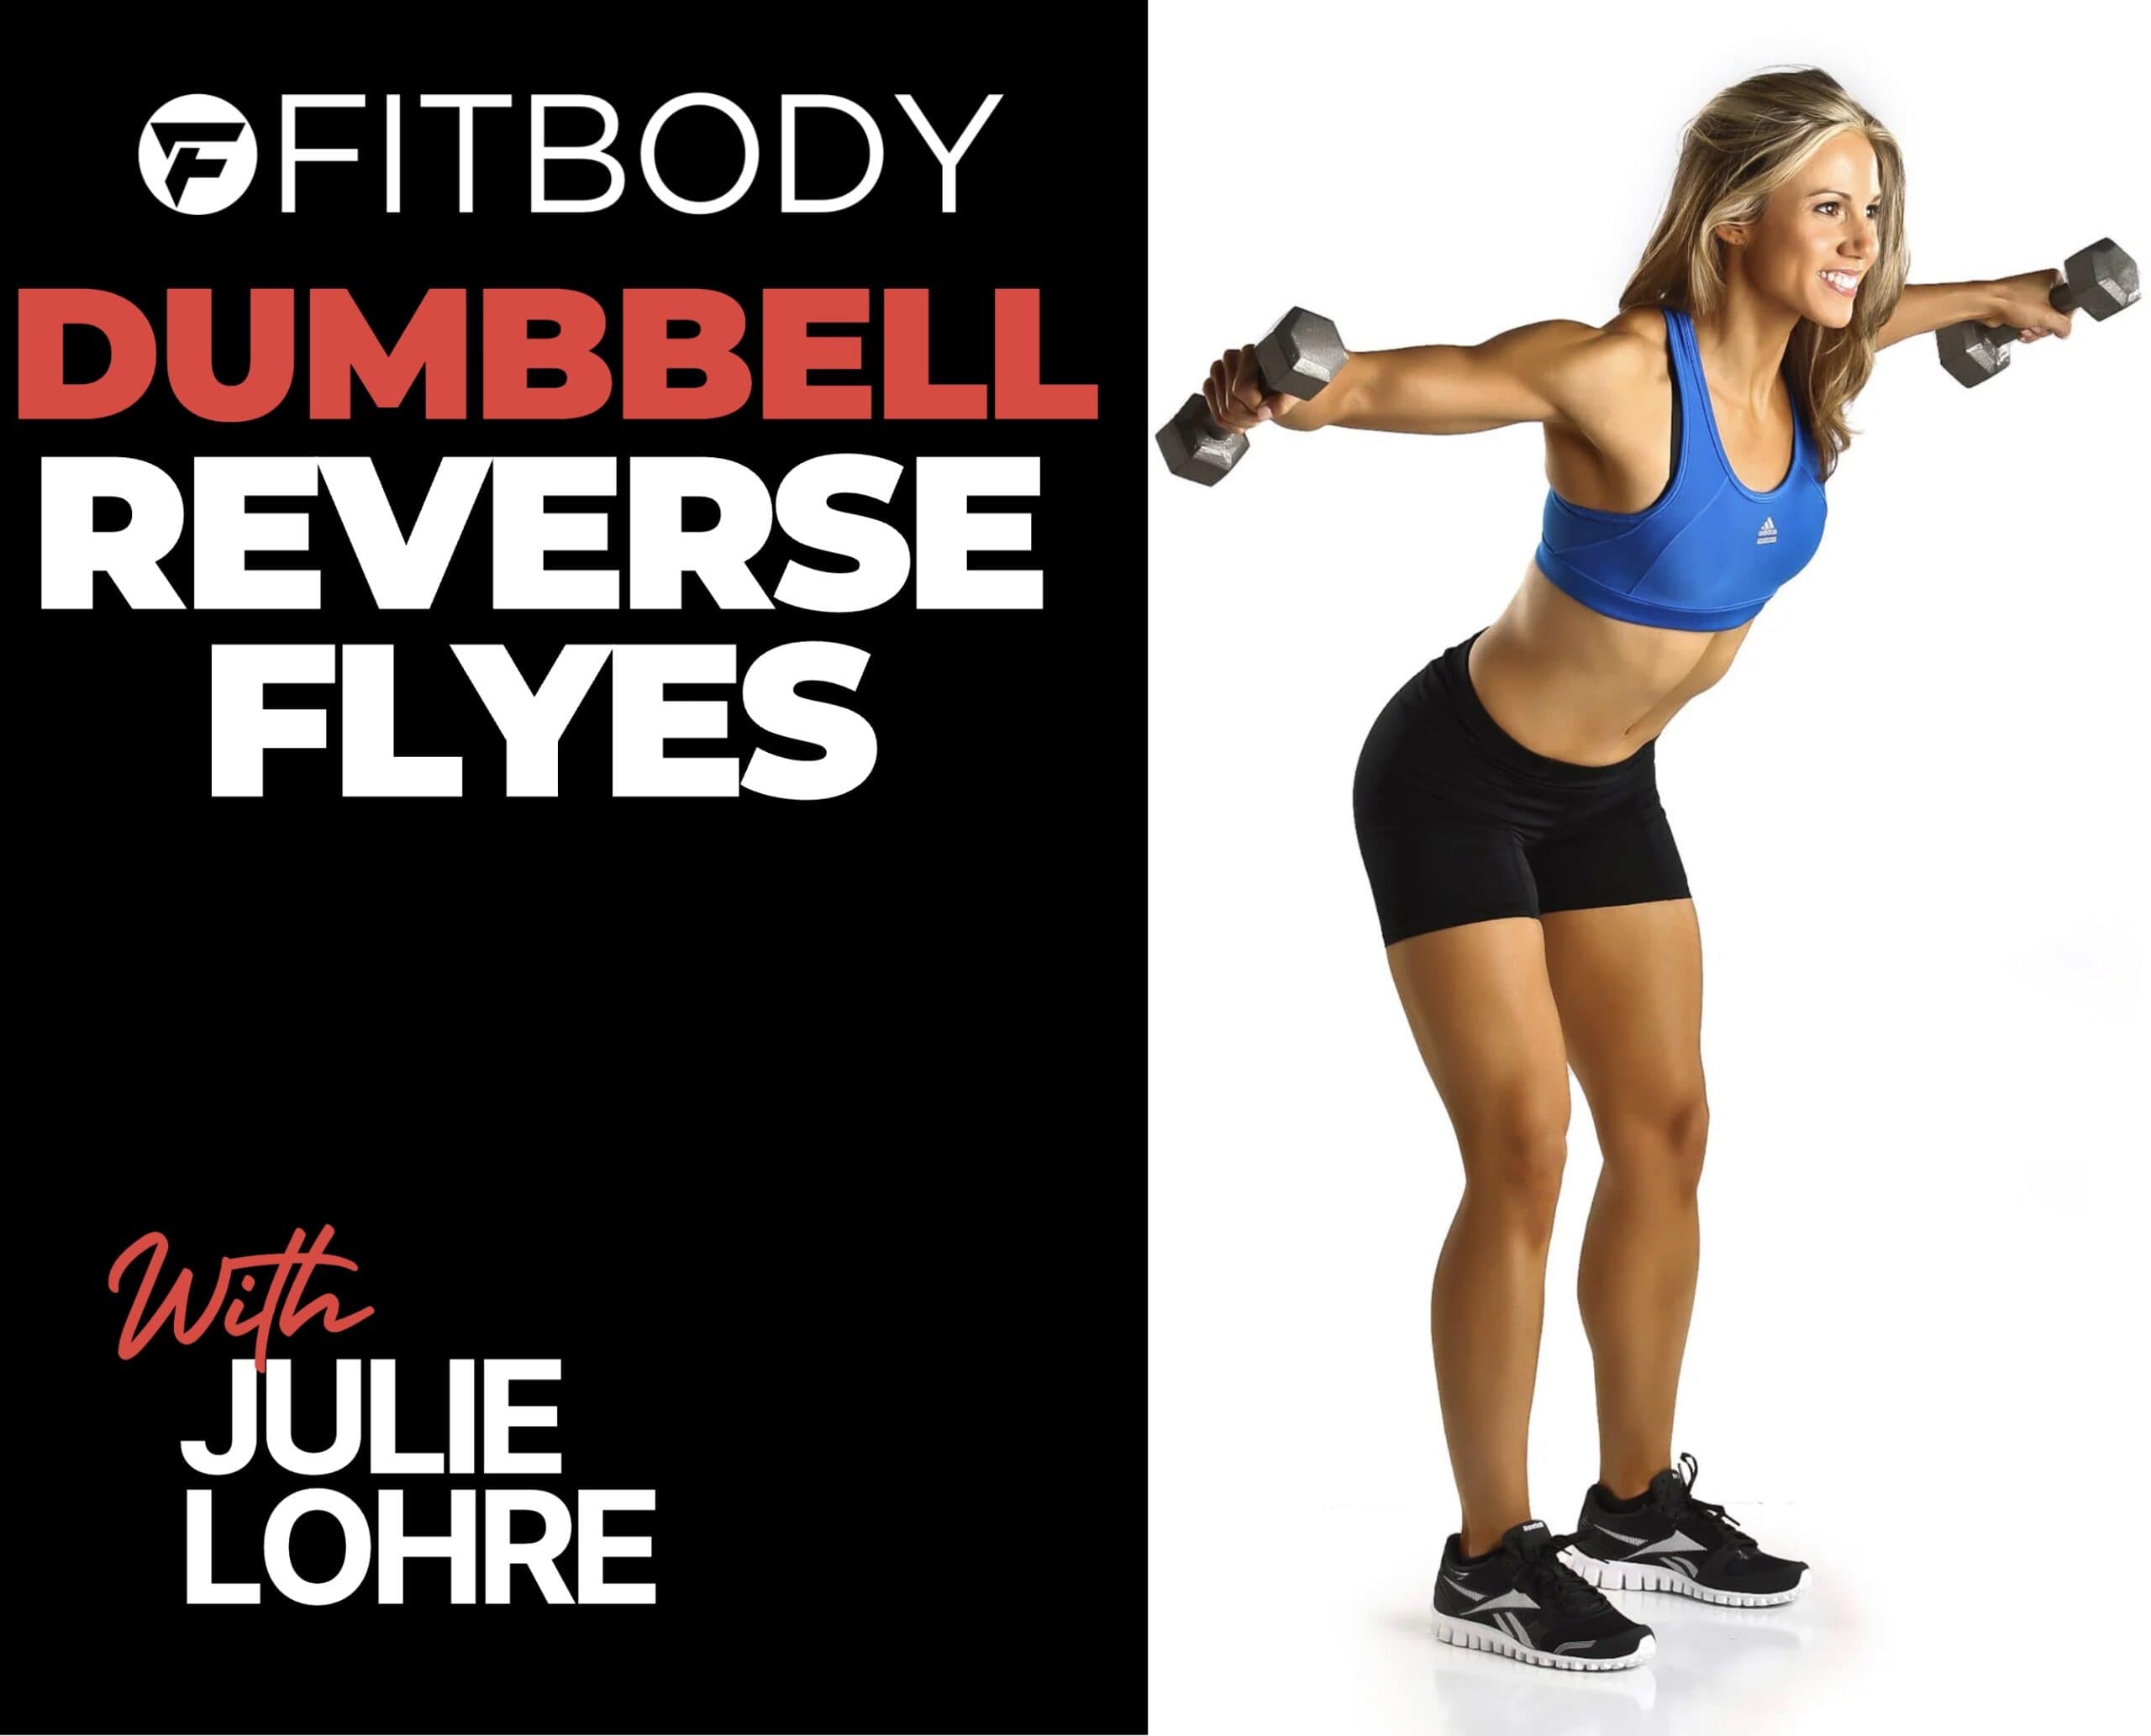 How To Do Reverse Flyes with Dumbbells